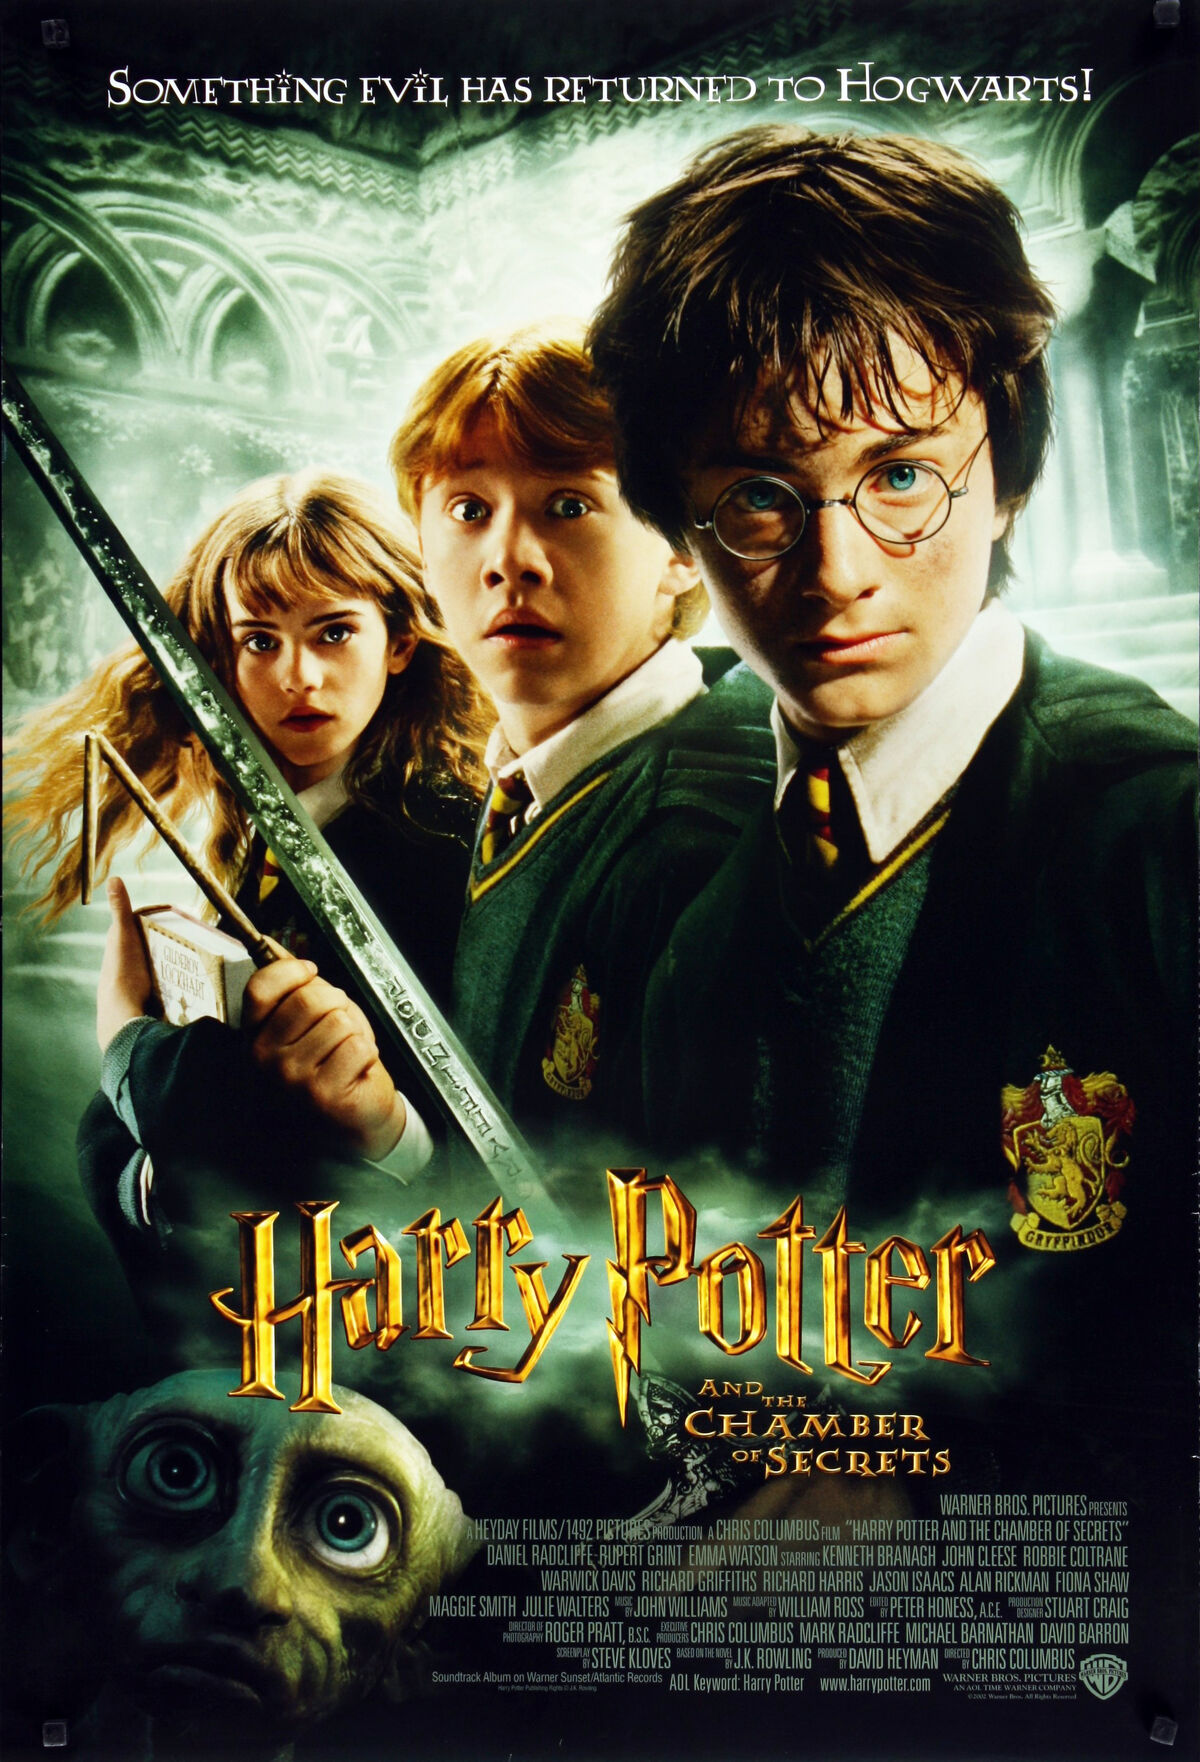 Harry Potter and the Chamber of Secrets (film), Harry Potter Wiki